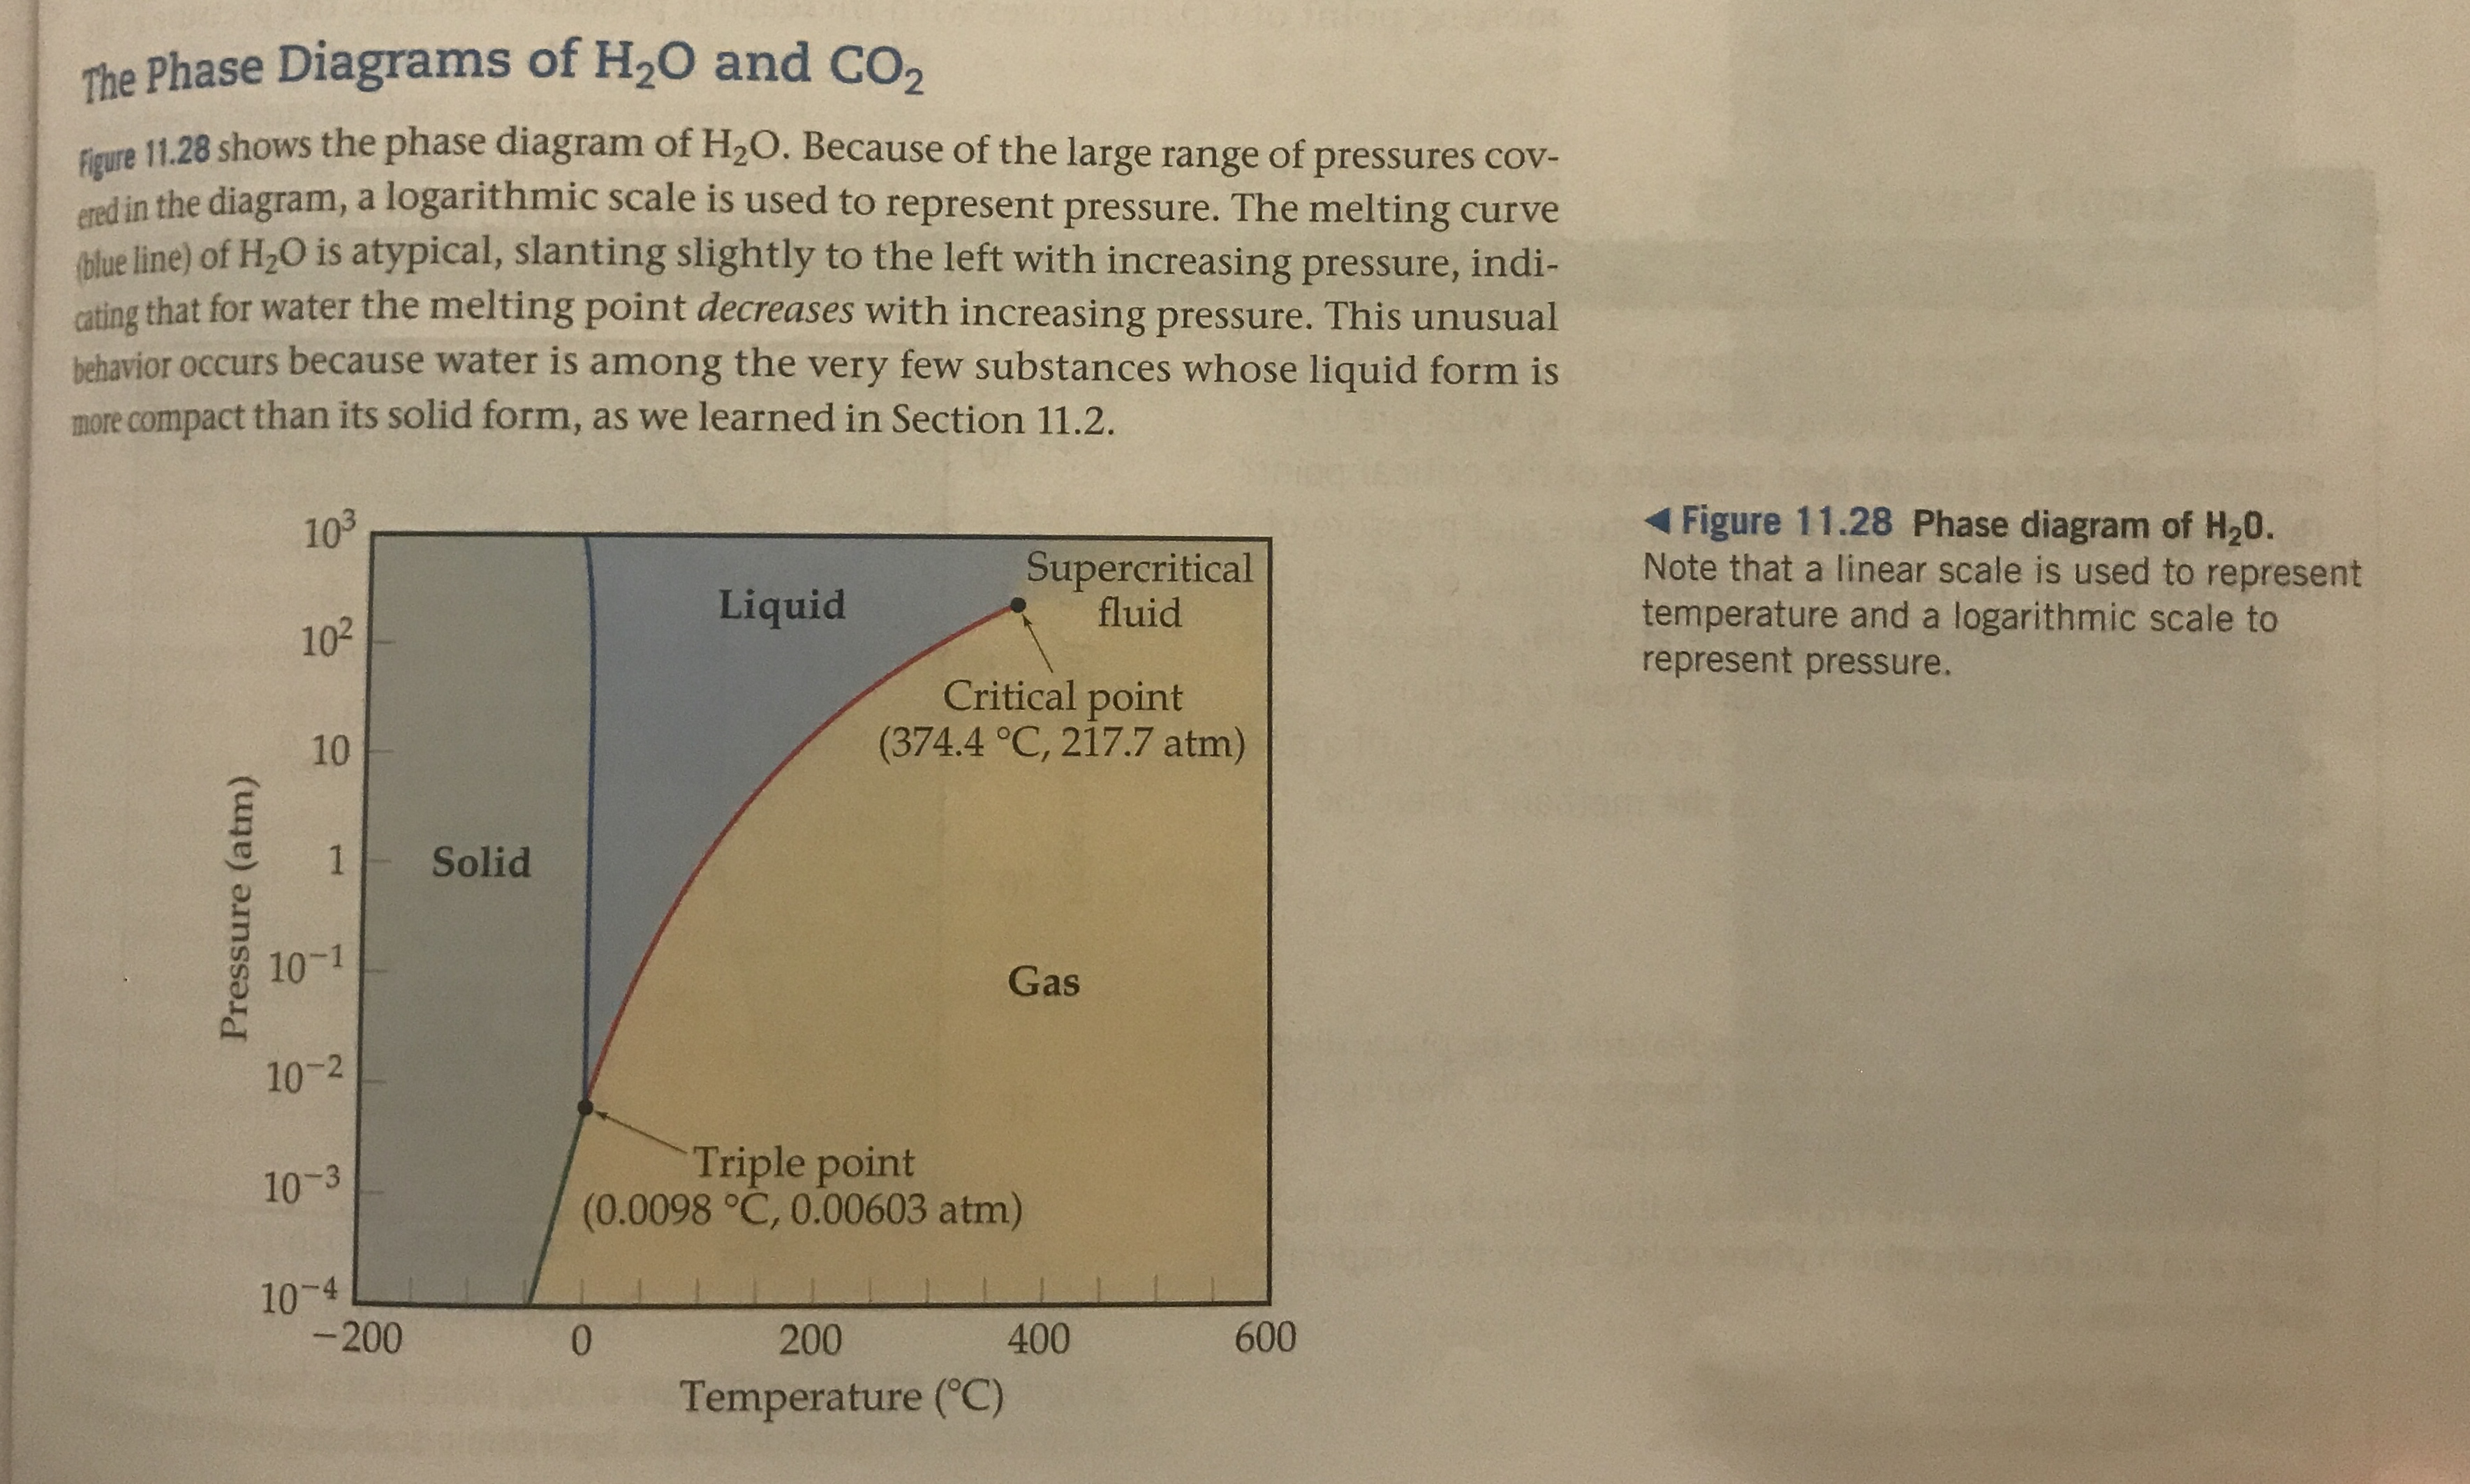 The Phase Diagrams of H20 and CO2
Figure 11.28 shows the phase diagram of H2O. Because of the large range of pressures cov-
red in the diagram, a logarithmic scale is used to represent pressure. The melting curve
lue line) of H2O is atypical, slanting slightly to the left with increasing pressure, indi-
cating that for water the melting point decreases with increasing pressure. This unusual
behavior occurs because water is among the very few substances whose liquid form is
more compact than its solid form, as we learned in Section 11.2.
Figure 11.28 Phase diagram of H20.
Note that a linear scale is used to represent
temperature and a logarithmic scale to
represent pressure.
103
Supercritical
fluid
Liquid
102
Critical point
(374.4 °C, 217.7 atm)
10
1
Solid
10-1
Gas
10-2
Triple point
(0.0098 °C, 0.00603 atm)
10-3
10-4
-200
600
400
200
0
Temperature (C)
Pressure (atm)
